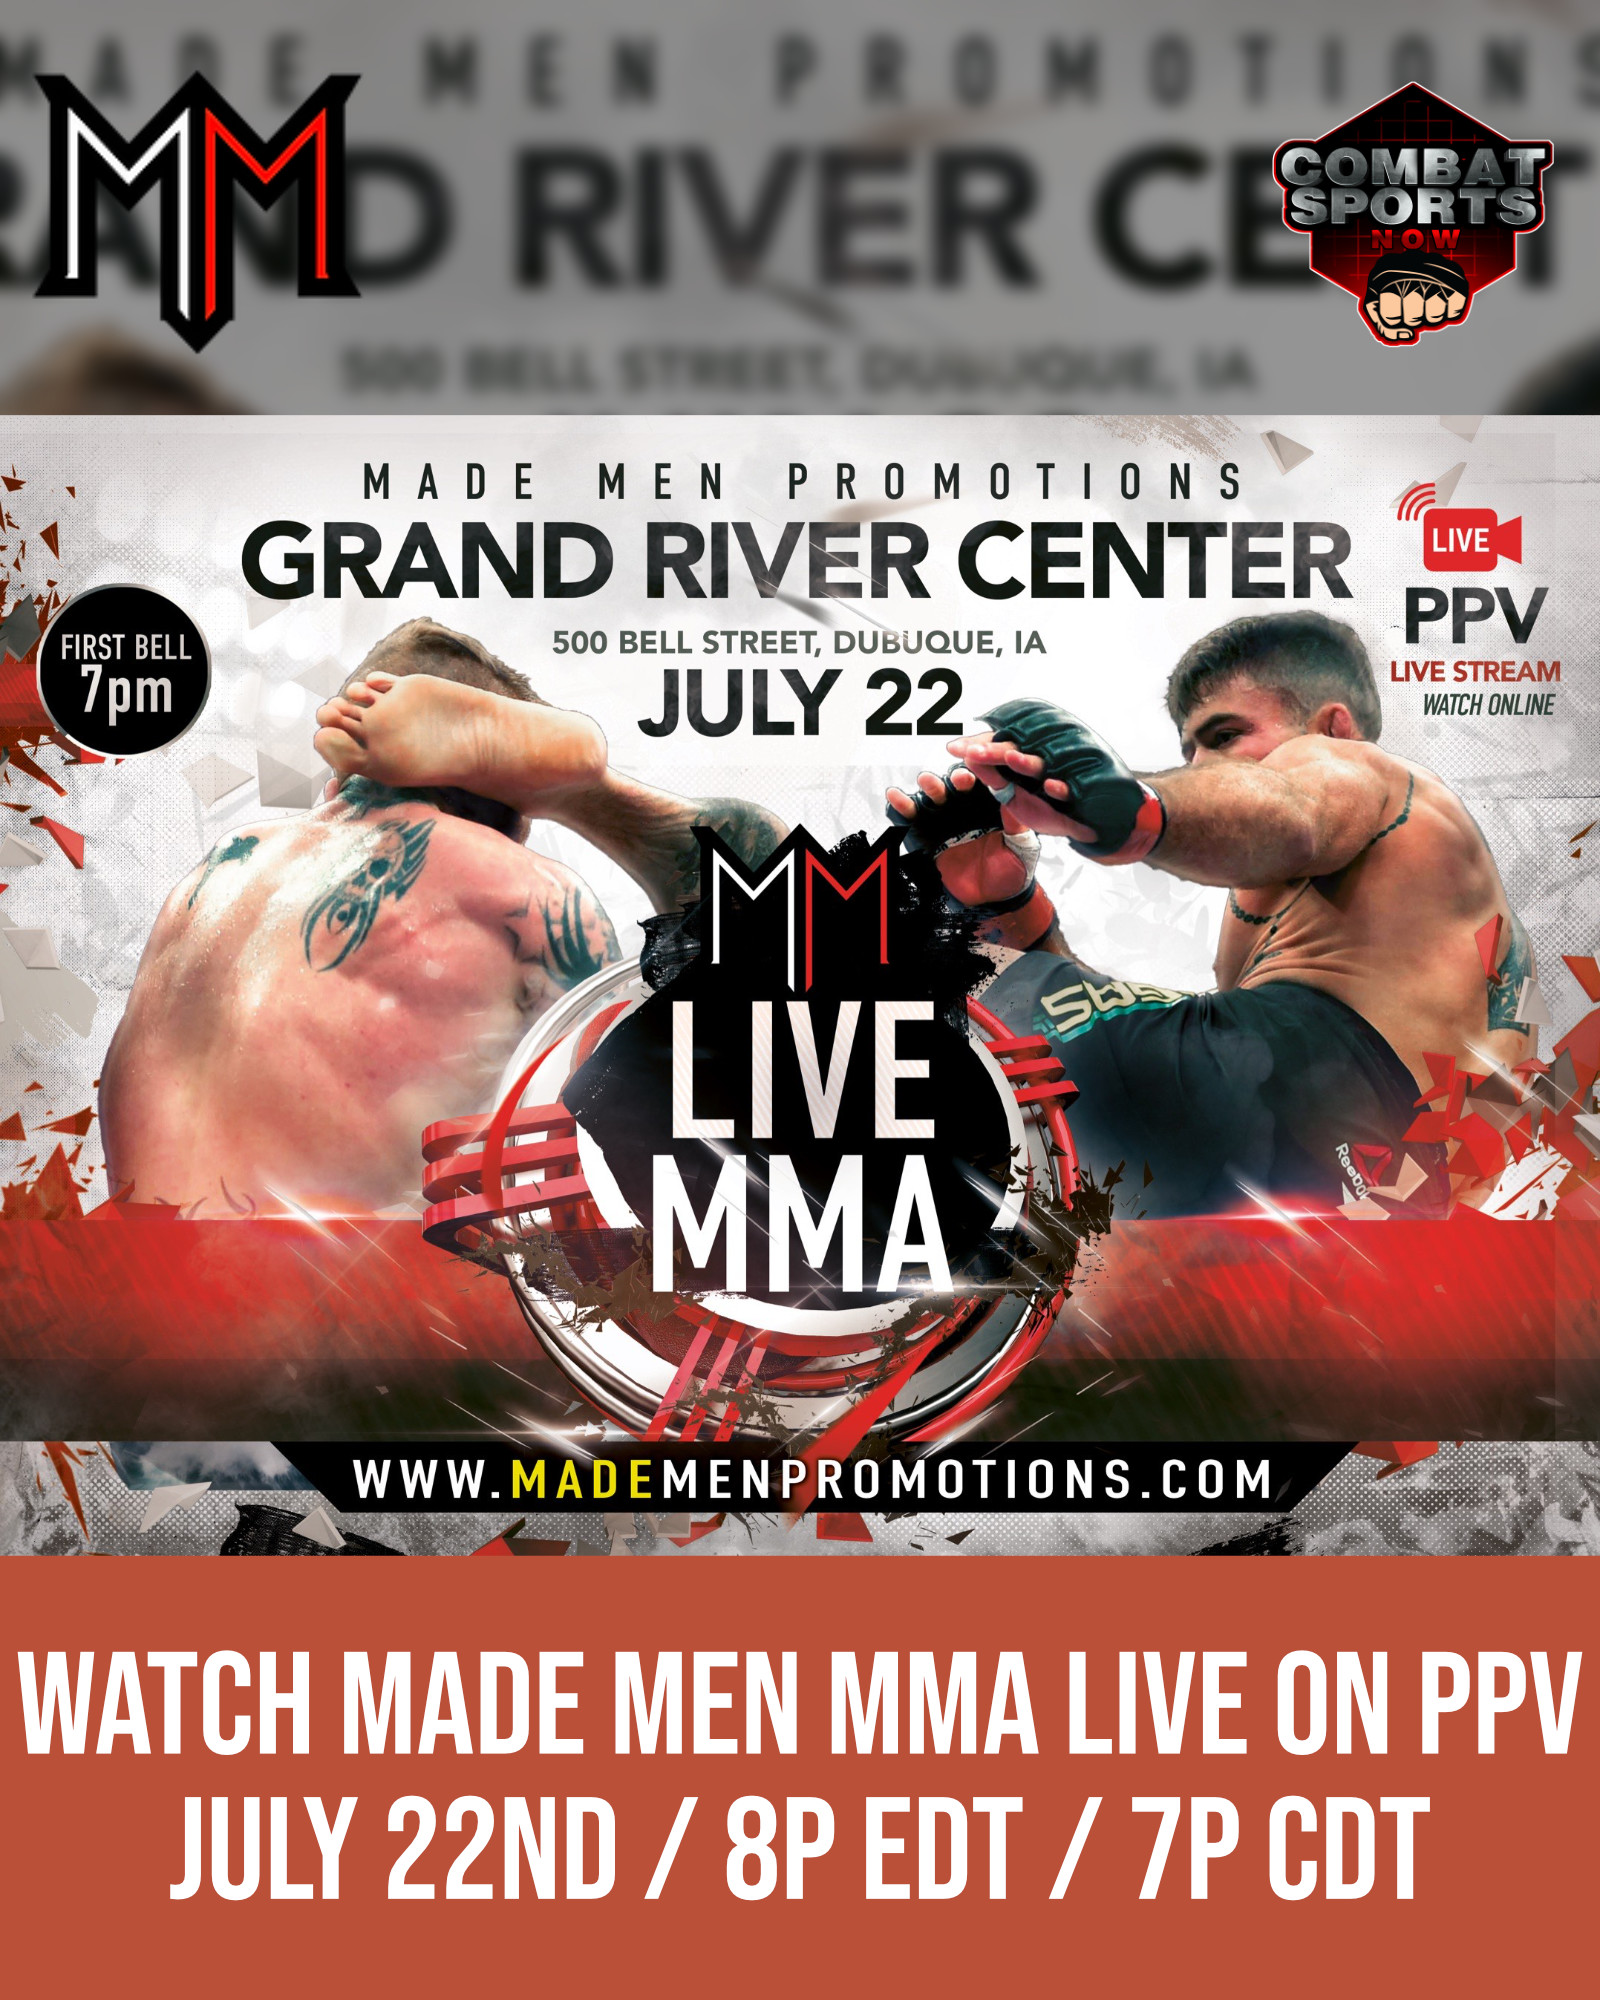 Watch Made Men Promotions Live MMA at Grand River Center on Combat Sports Now